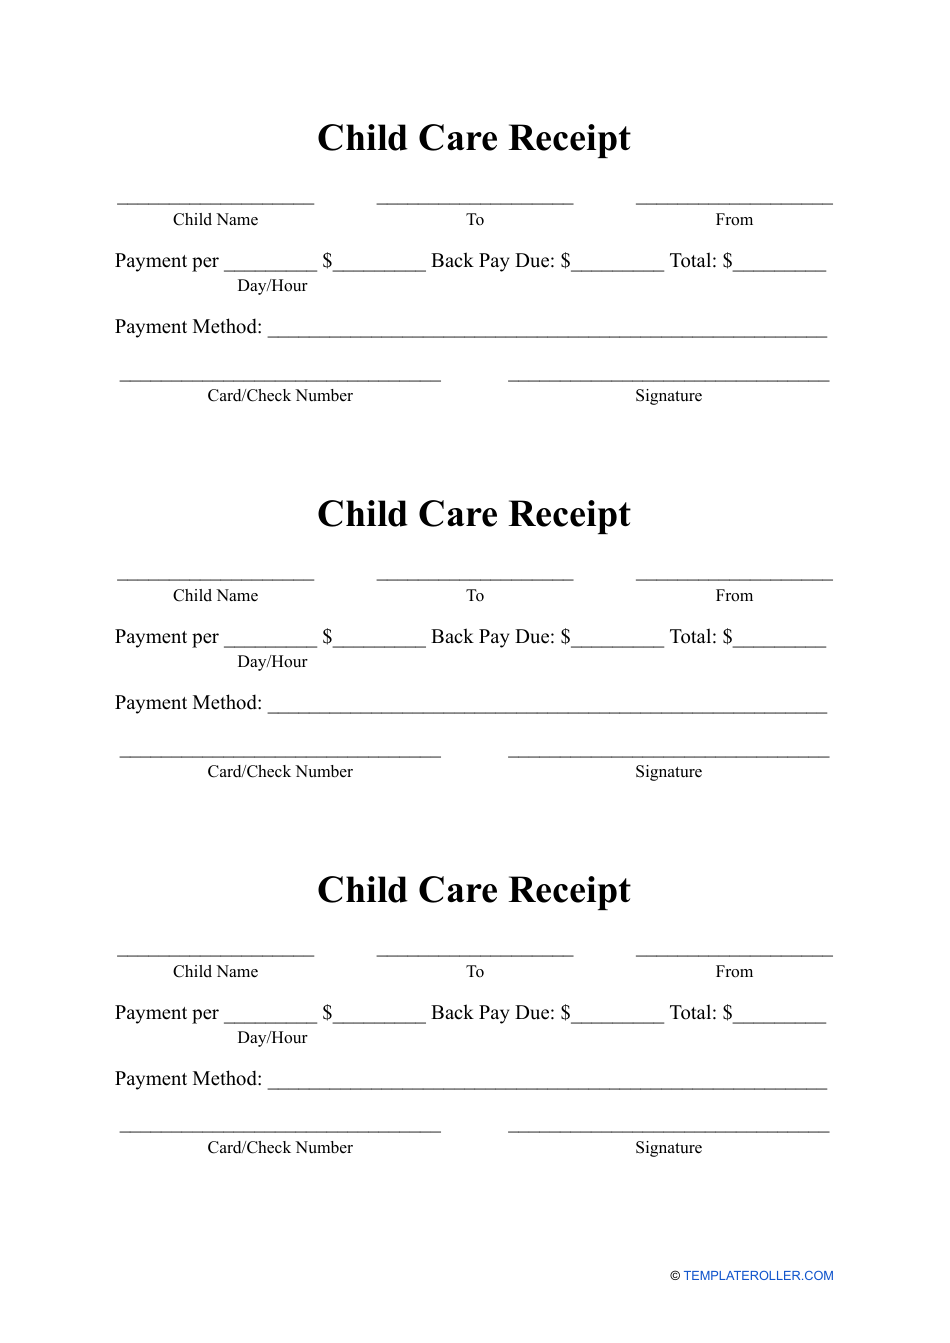 receipt-for-child-care-services-template